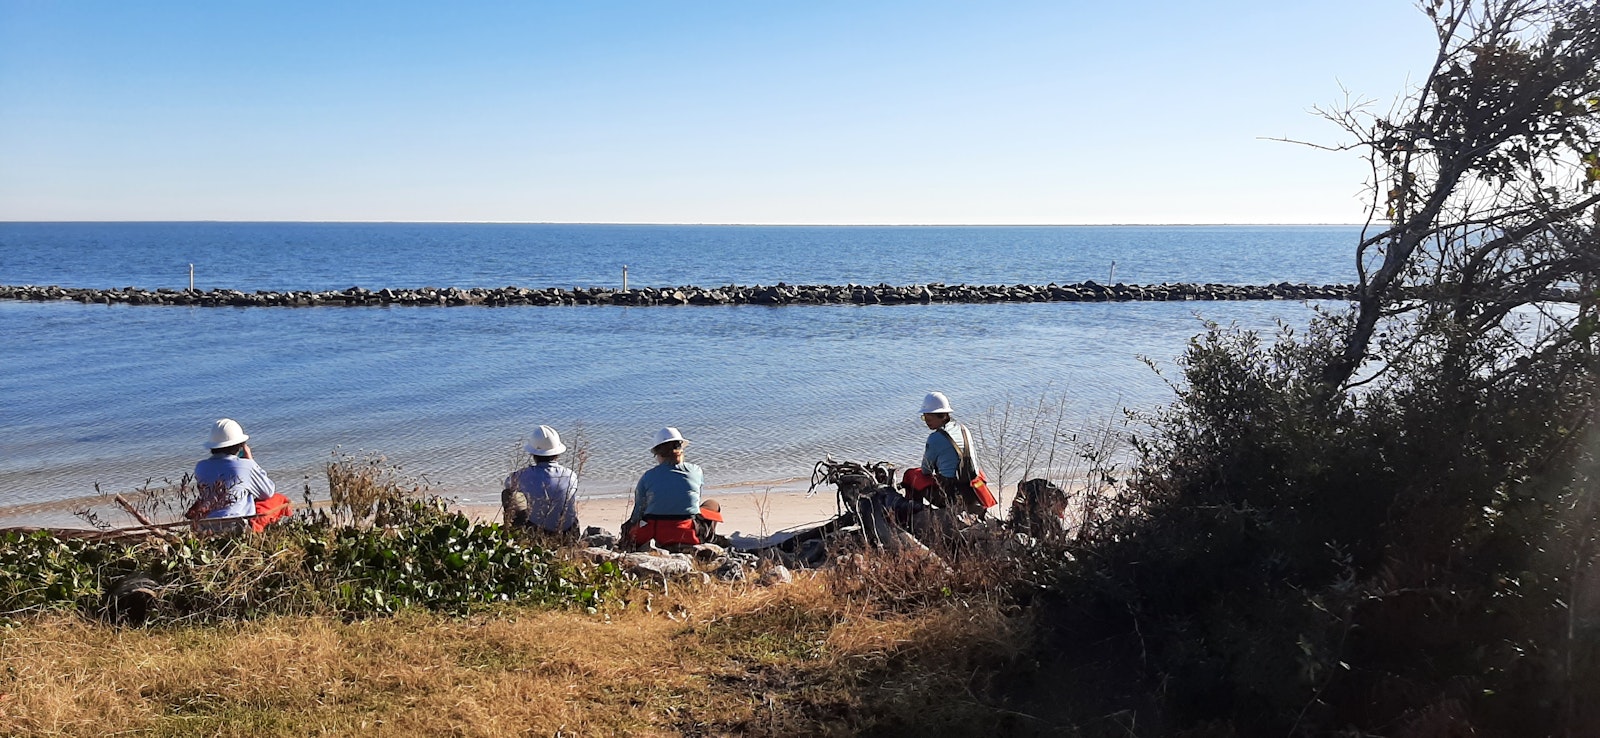 A group of people sit on a shoreline, wearing hardhats